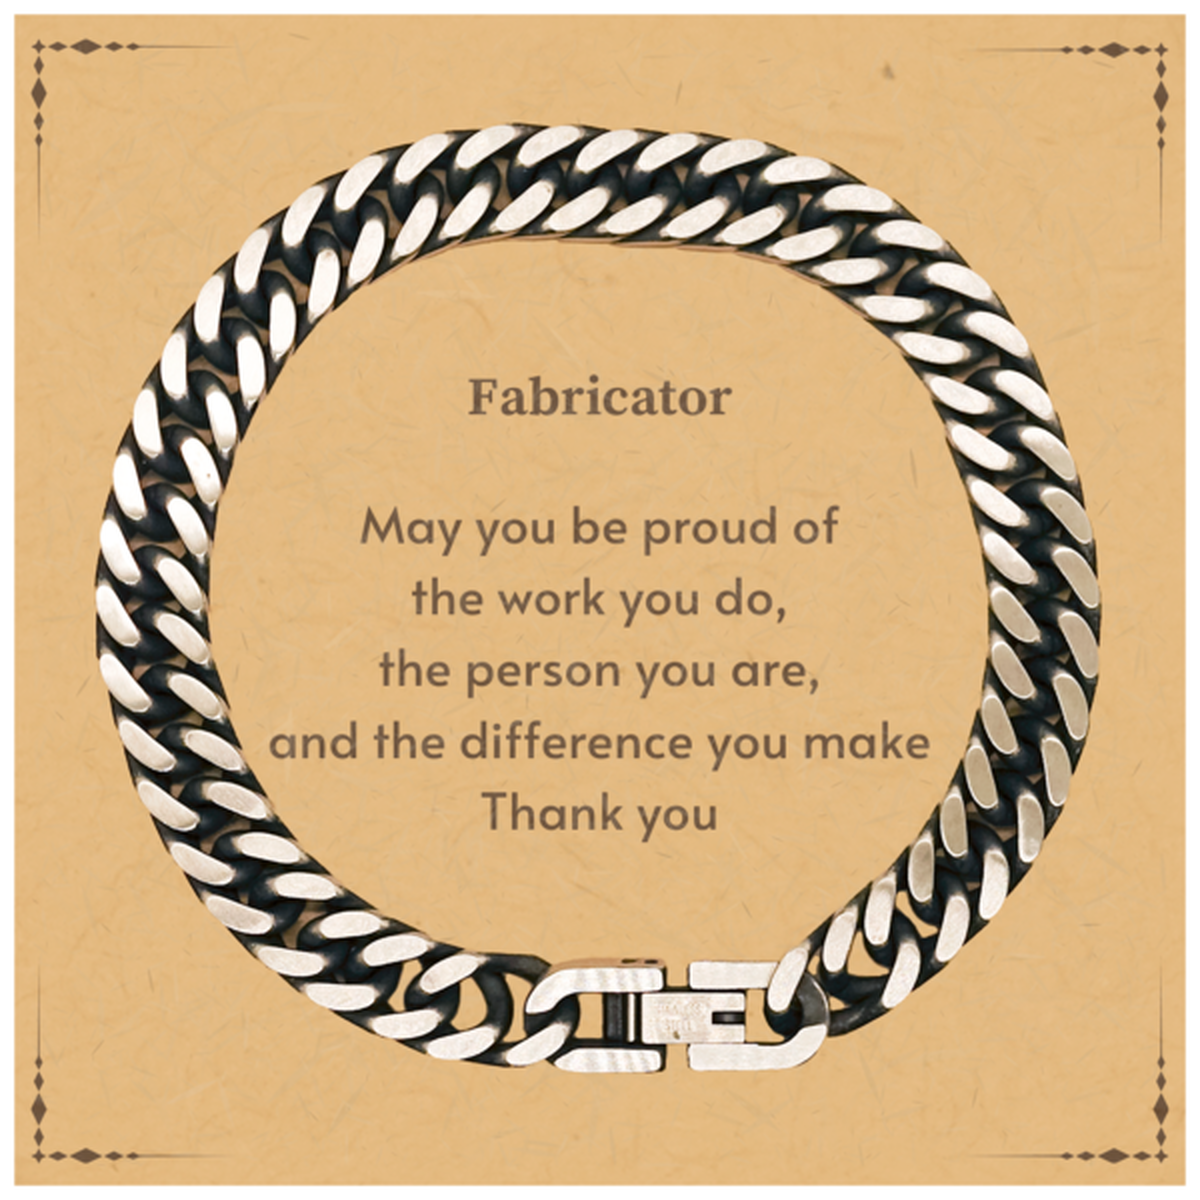 Heartwarming Cuban Link Chain Bracelet Retirement Coworkers Gifts for Fabricator, Fabricator May You be proud of the work you do, the person you are Gifts for Boss Men Women Friends